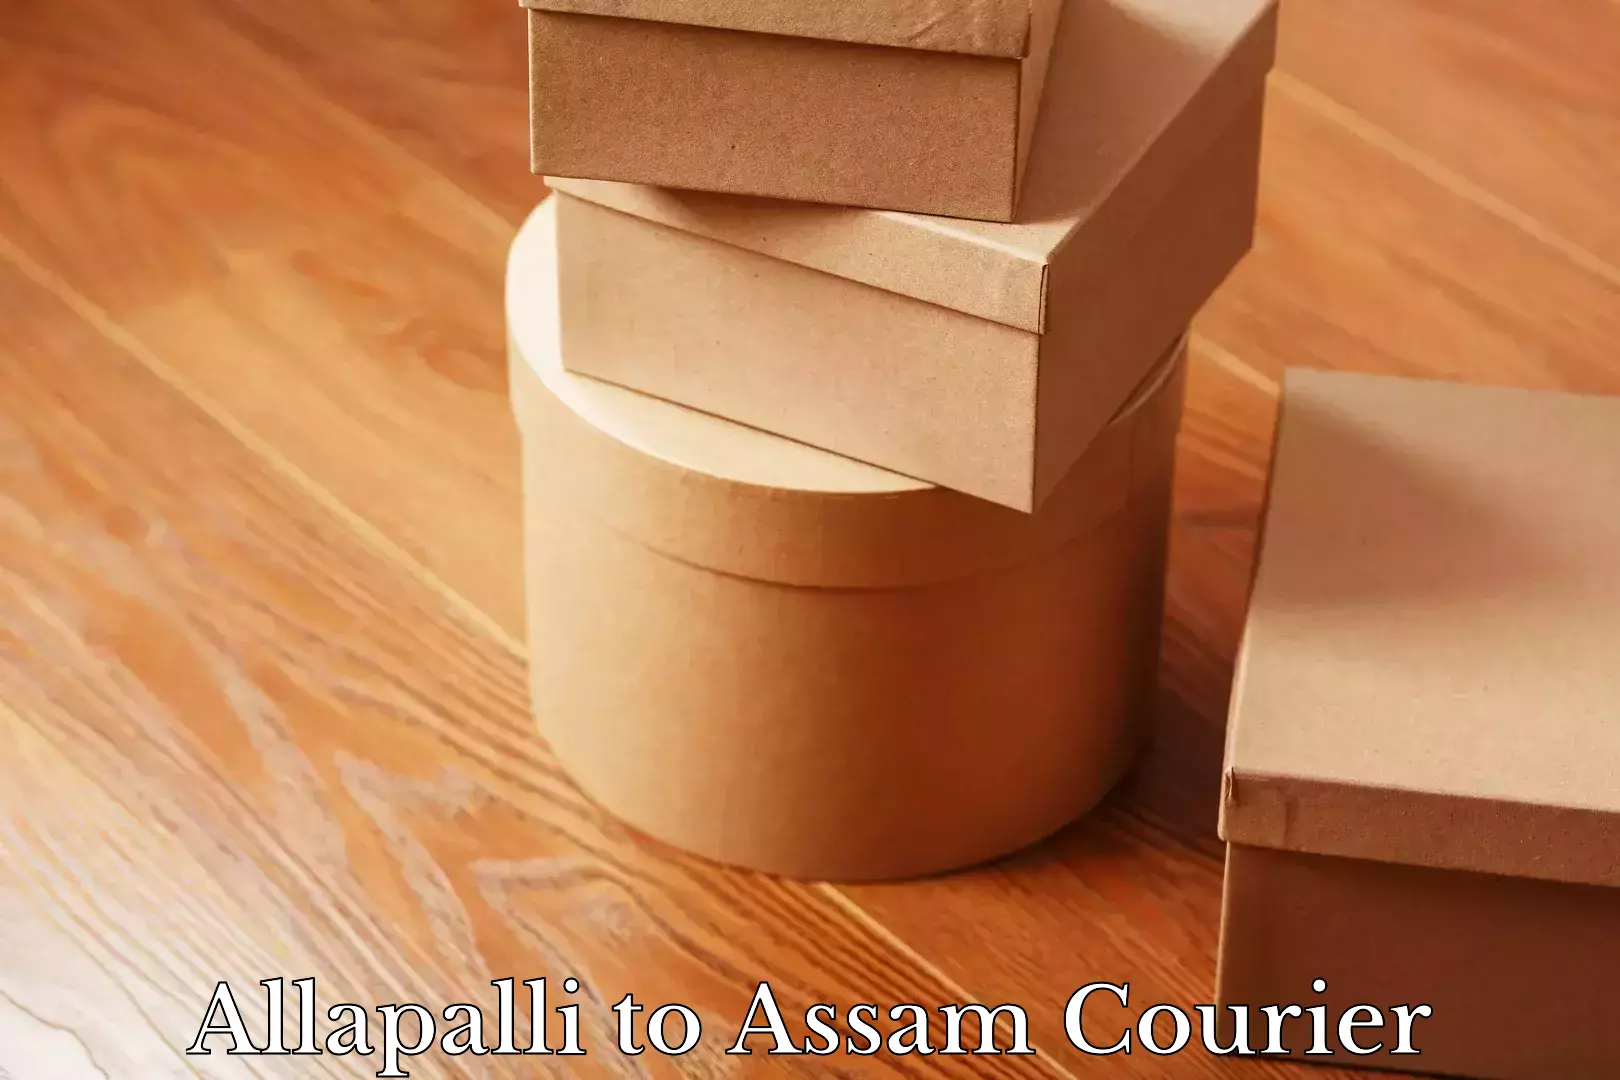 Courier membership Allapalli to Assam